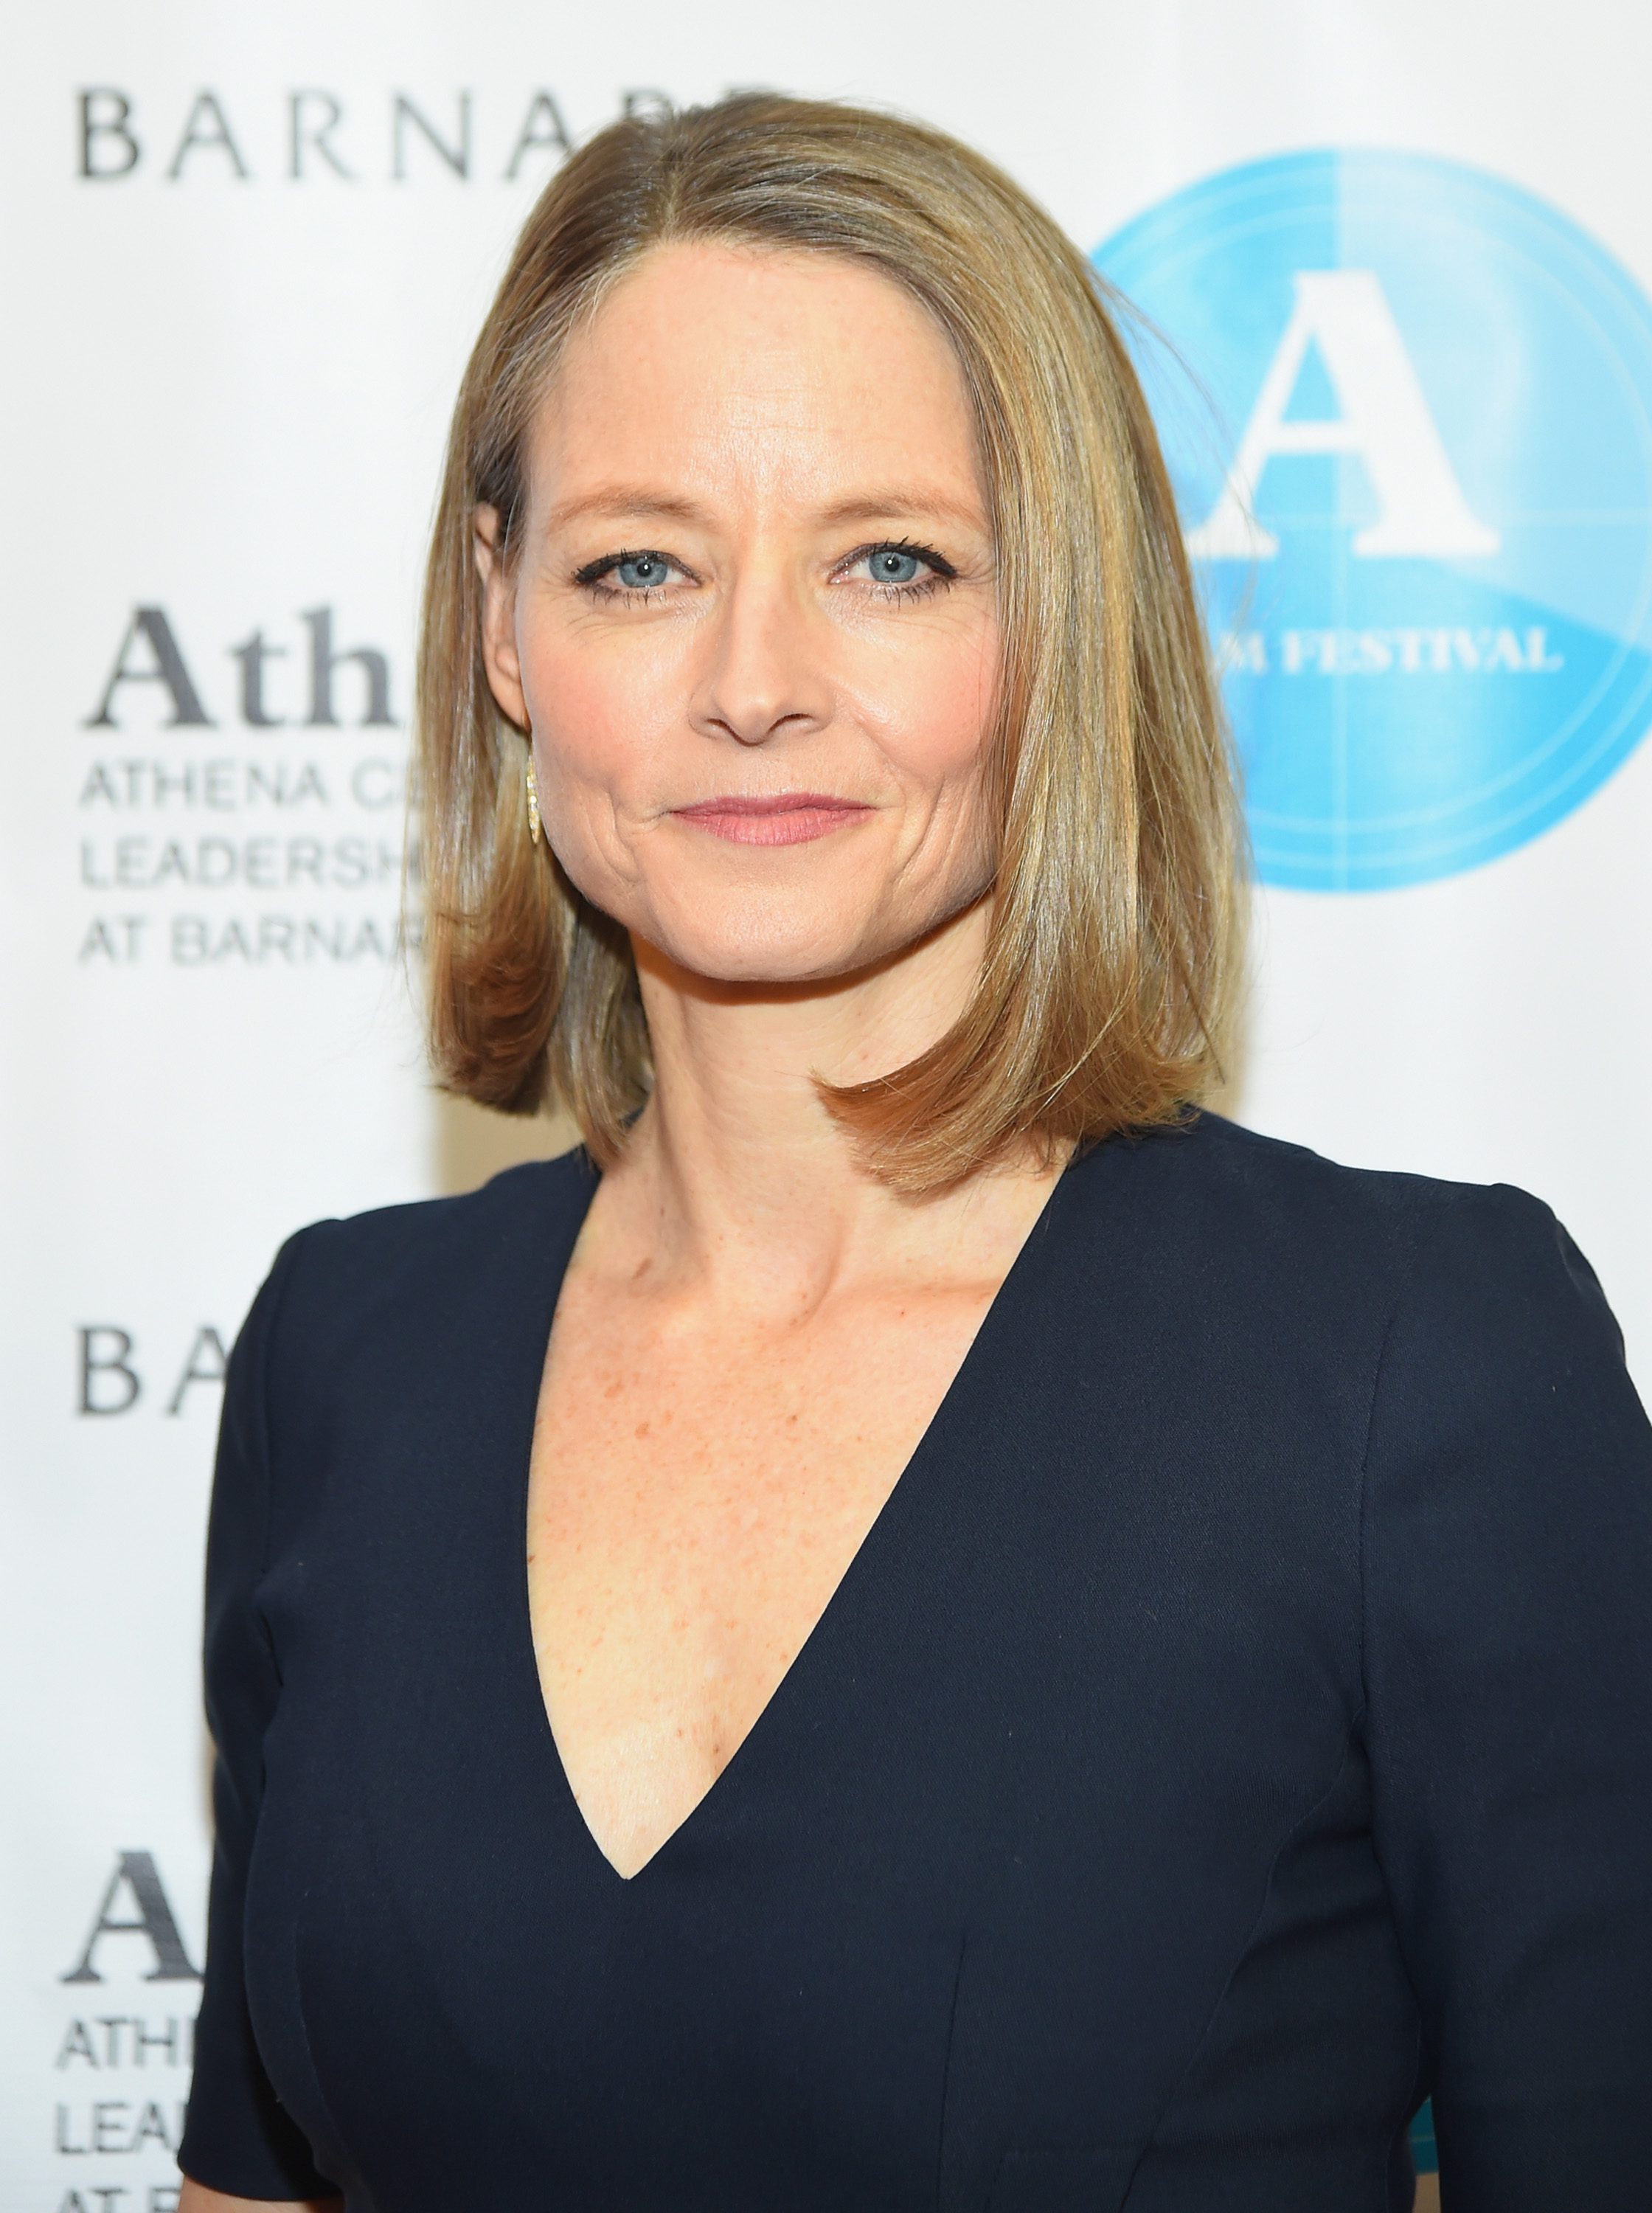 Jodie Foster attends the opening night of the 2015 Athena Film Festival on February 5, 2015 | Source: Getty Images